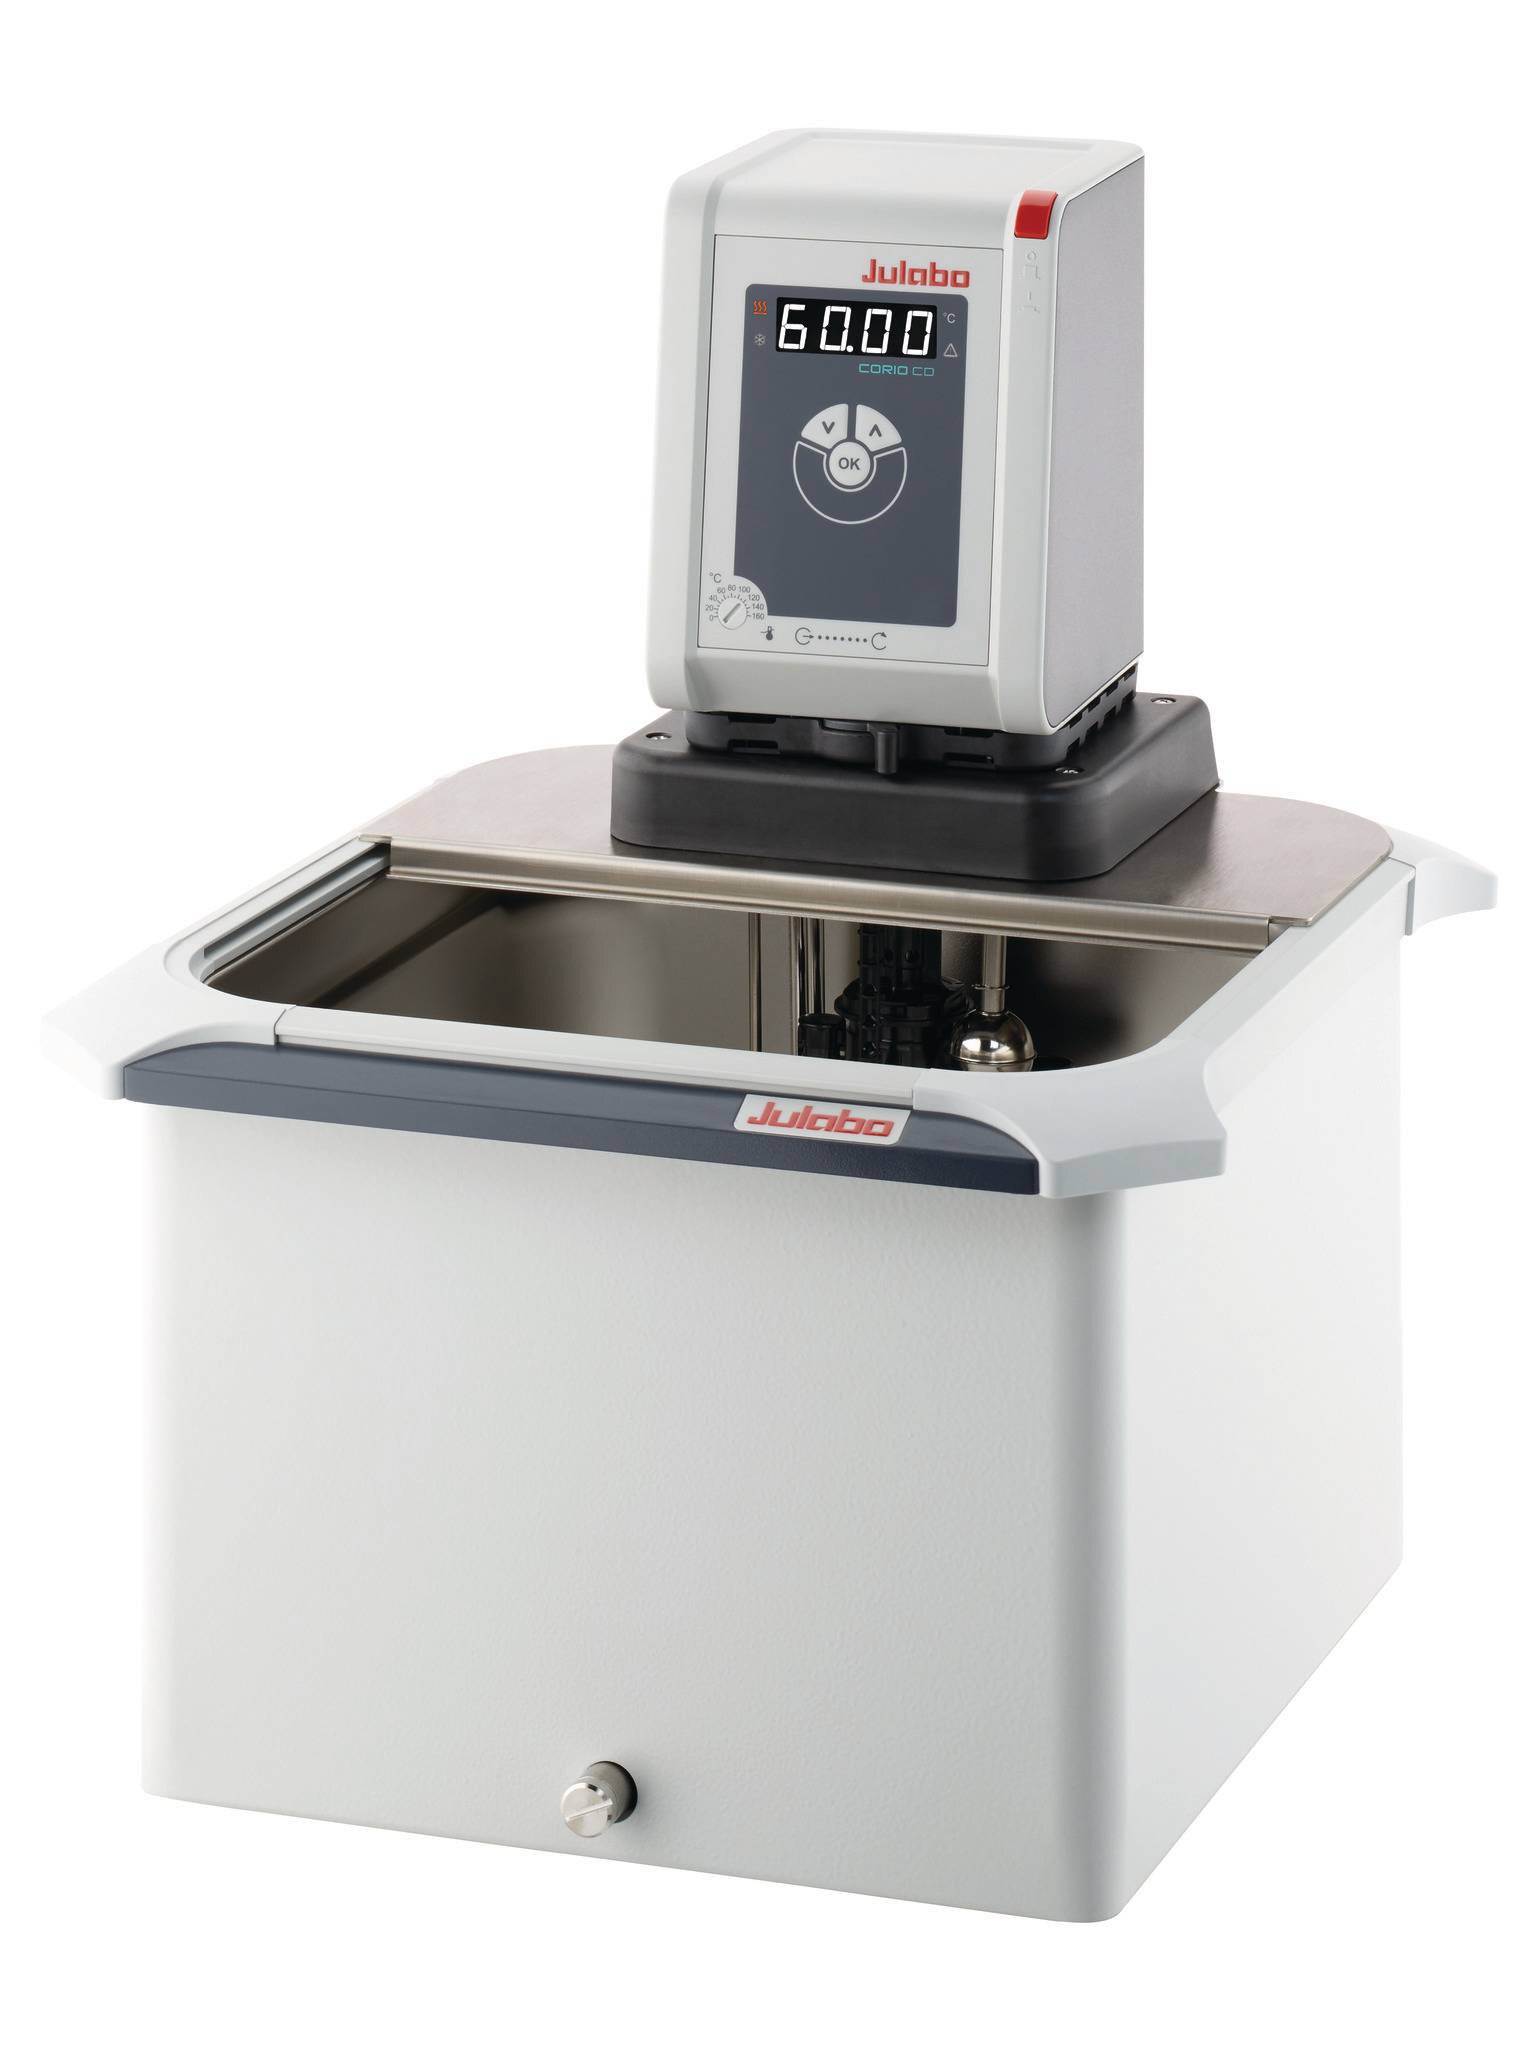 Heating circulator with stainless steel open bath CORIO CD-B17 from JULABO view 1